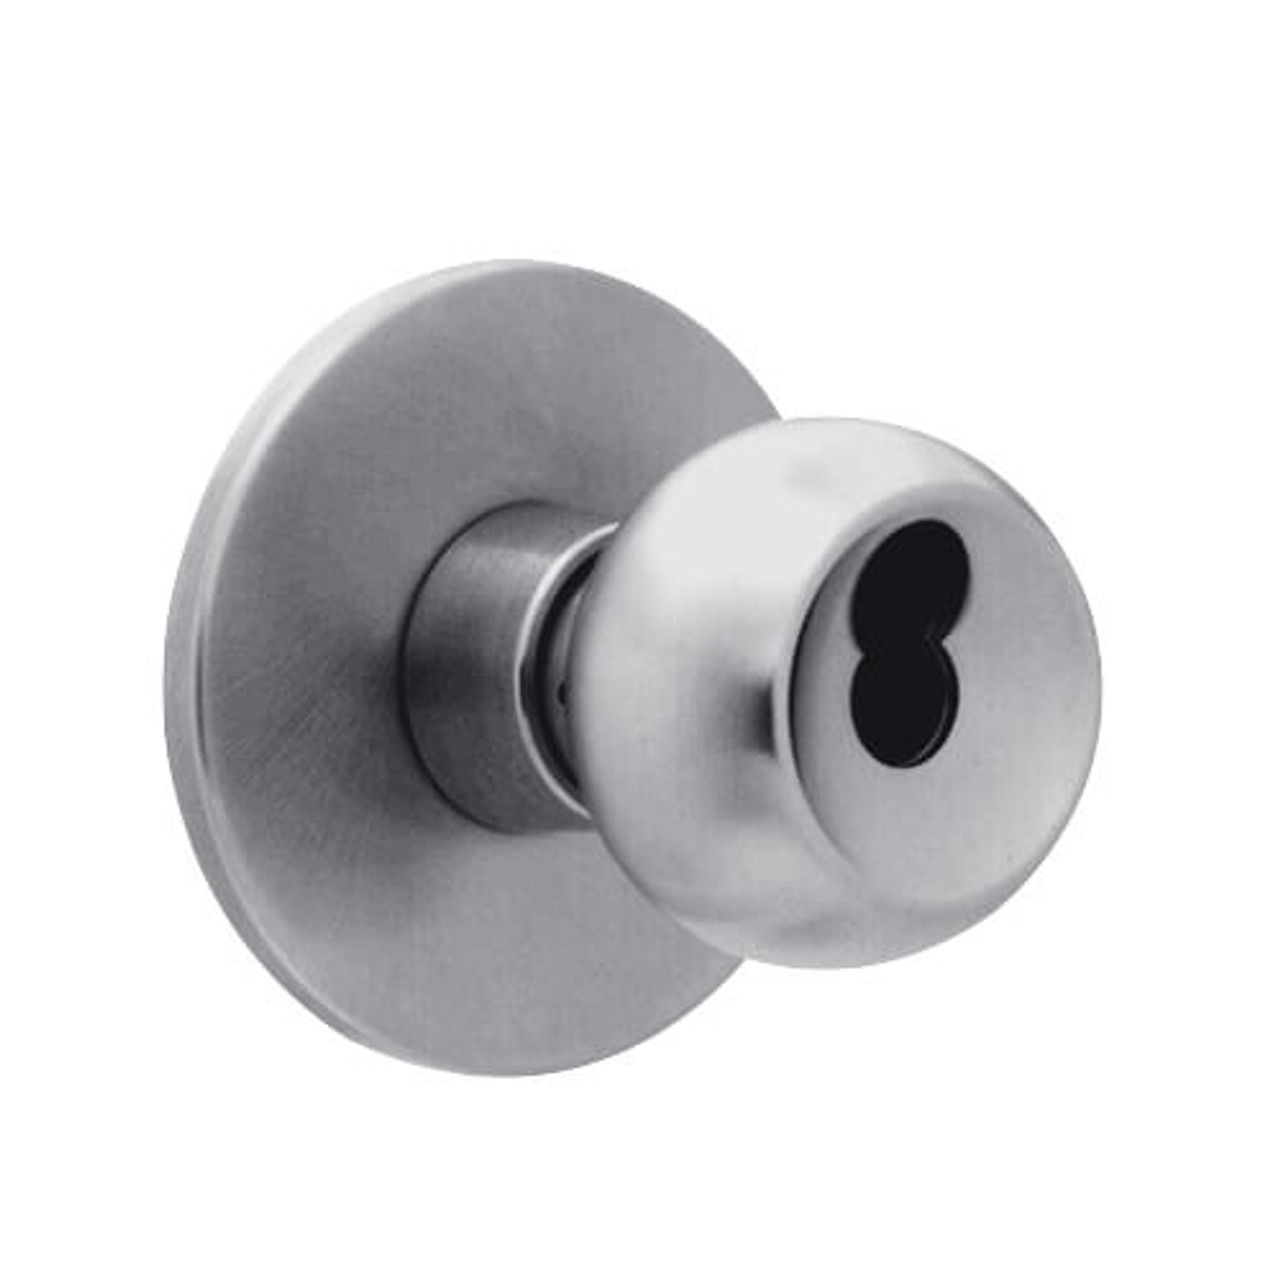 X571BD-TY-626 Falcon X Series Cylindrical Dormitory Lock with Troy-York Knob Style in Satin Chrome Finish